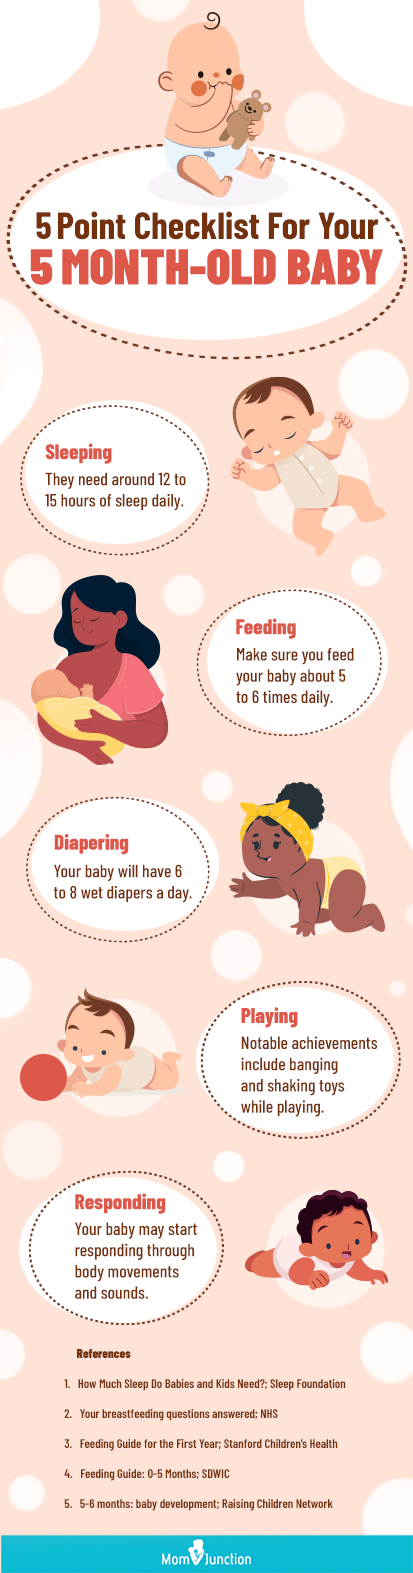 https://www.momjunction.com/wp-content/uploads/2022/09/5-Point-Checklist-For-Your-5-Month-Old-Baby.png